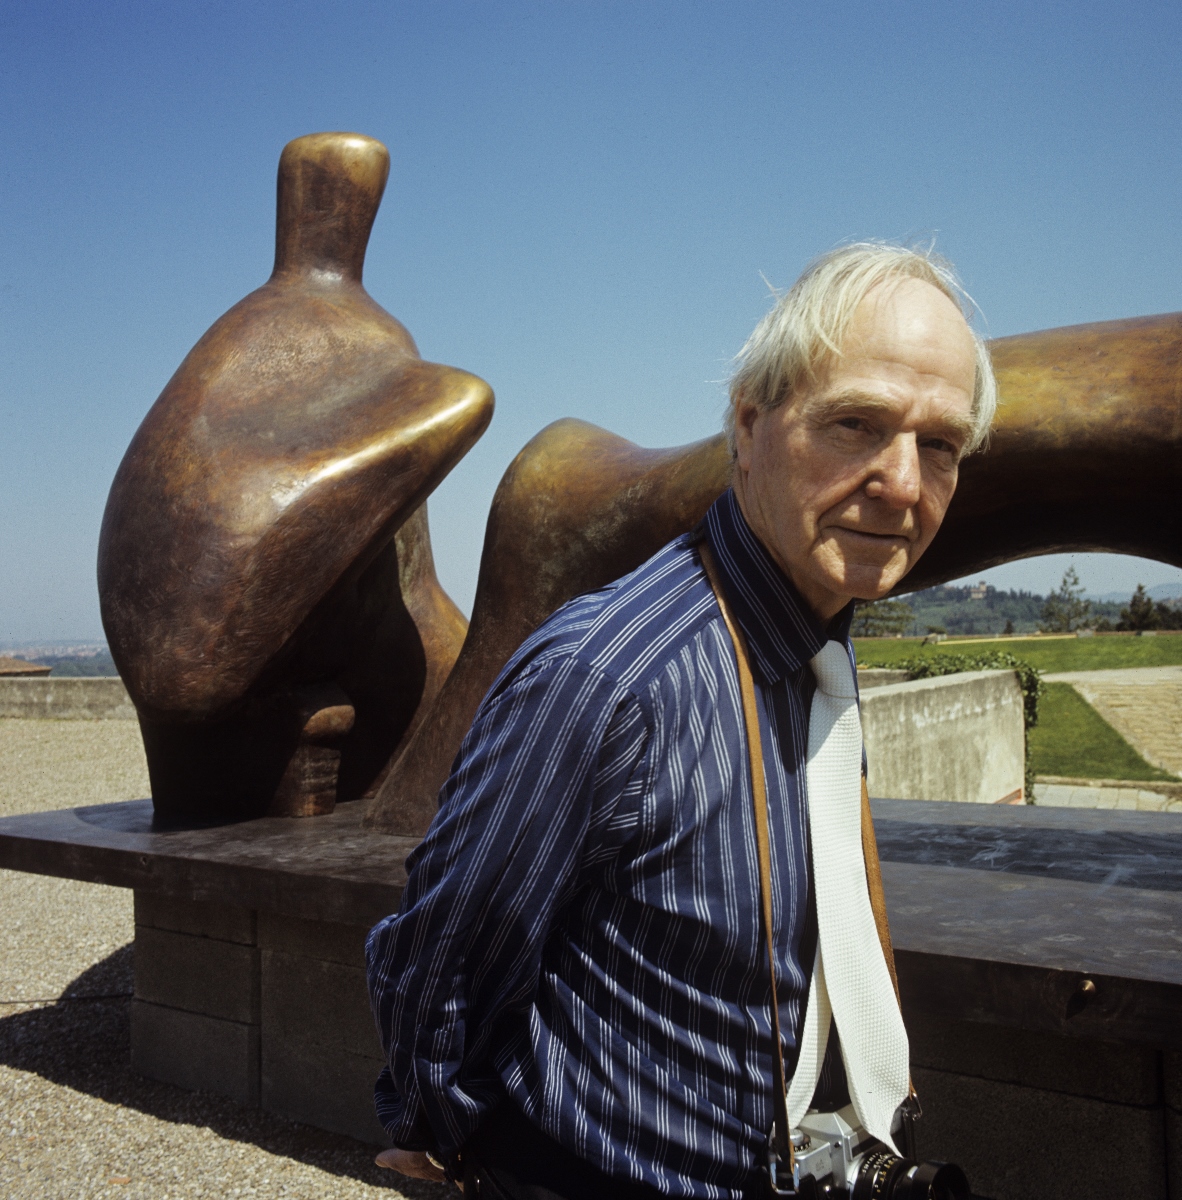 Henry Moore with Reclining Figure Arch Legat Forte di Belvedere for the 1972 Mostra di Henry Mooreexhibition. Photo Henry Moore Archive